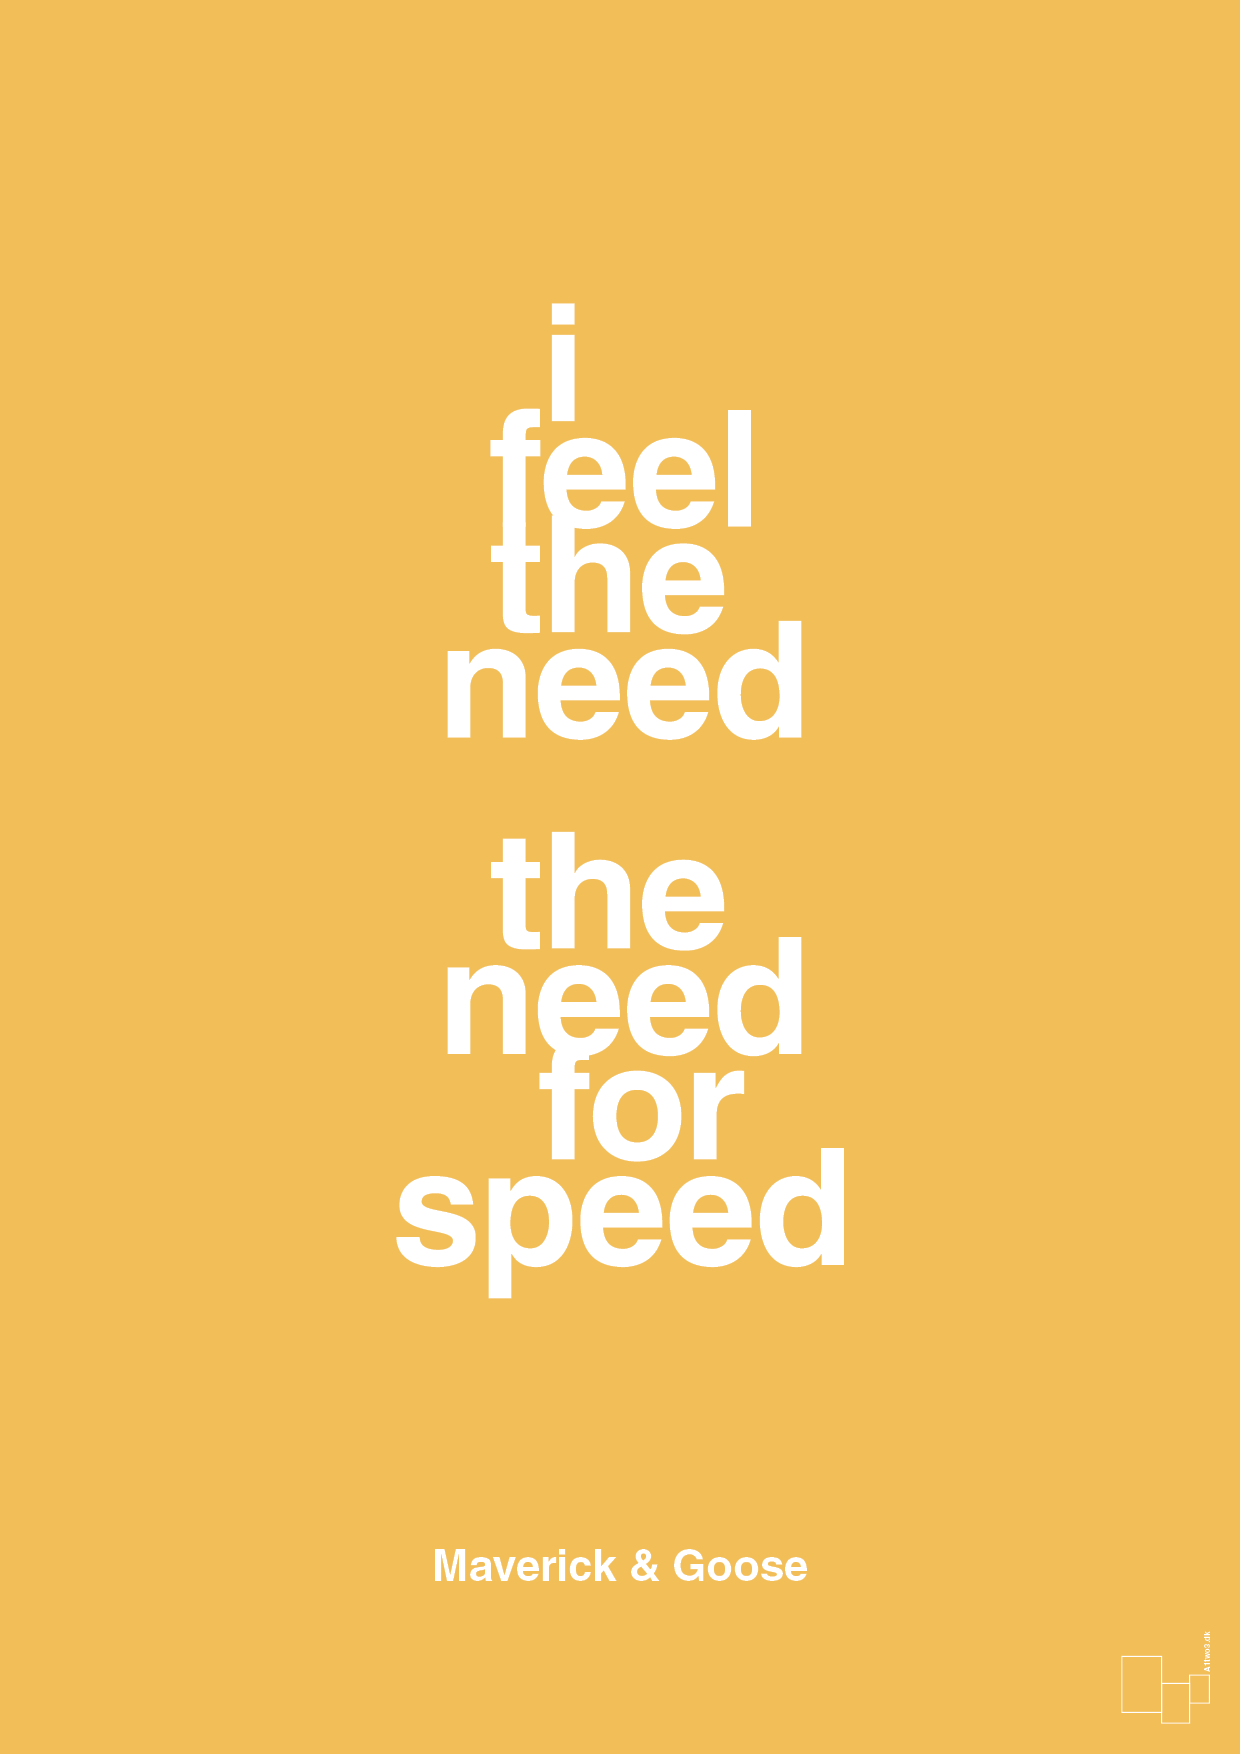 i feel the need the need for speed - Plakat med Citater i Honeycomb